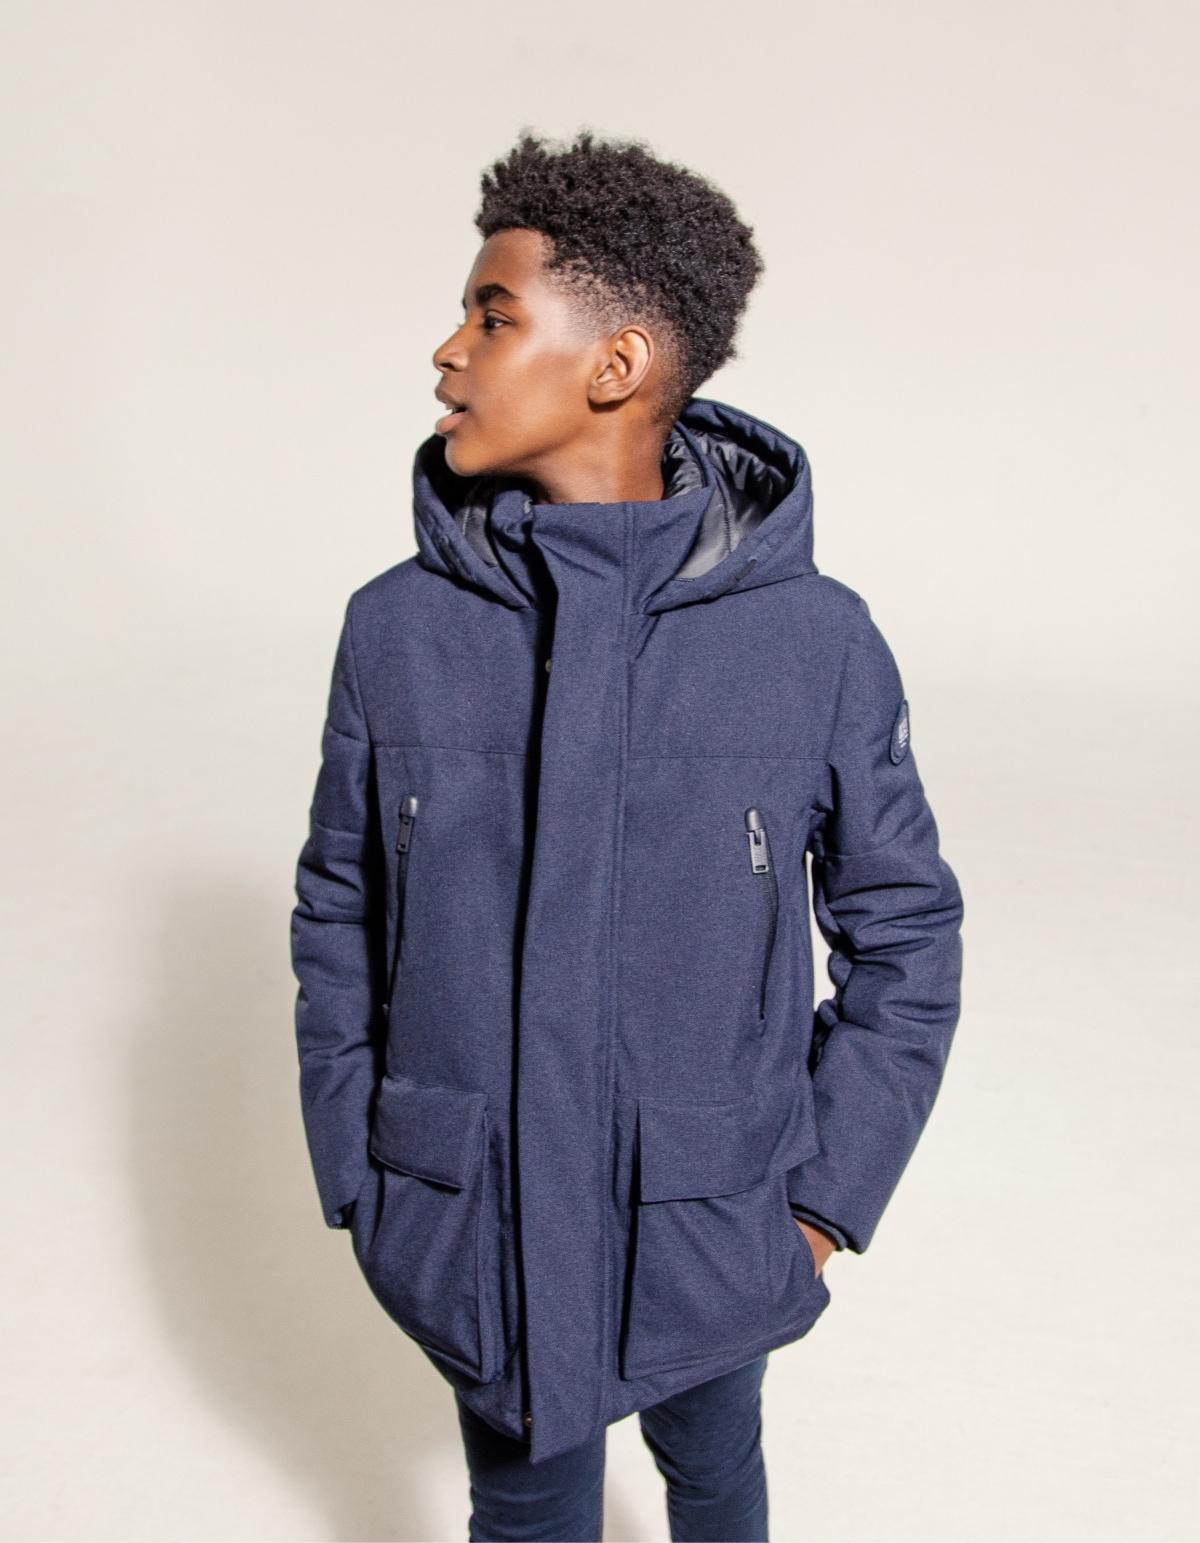 Boys’ navy parka with black quilted lining